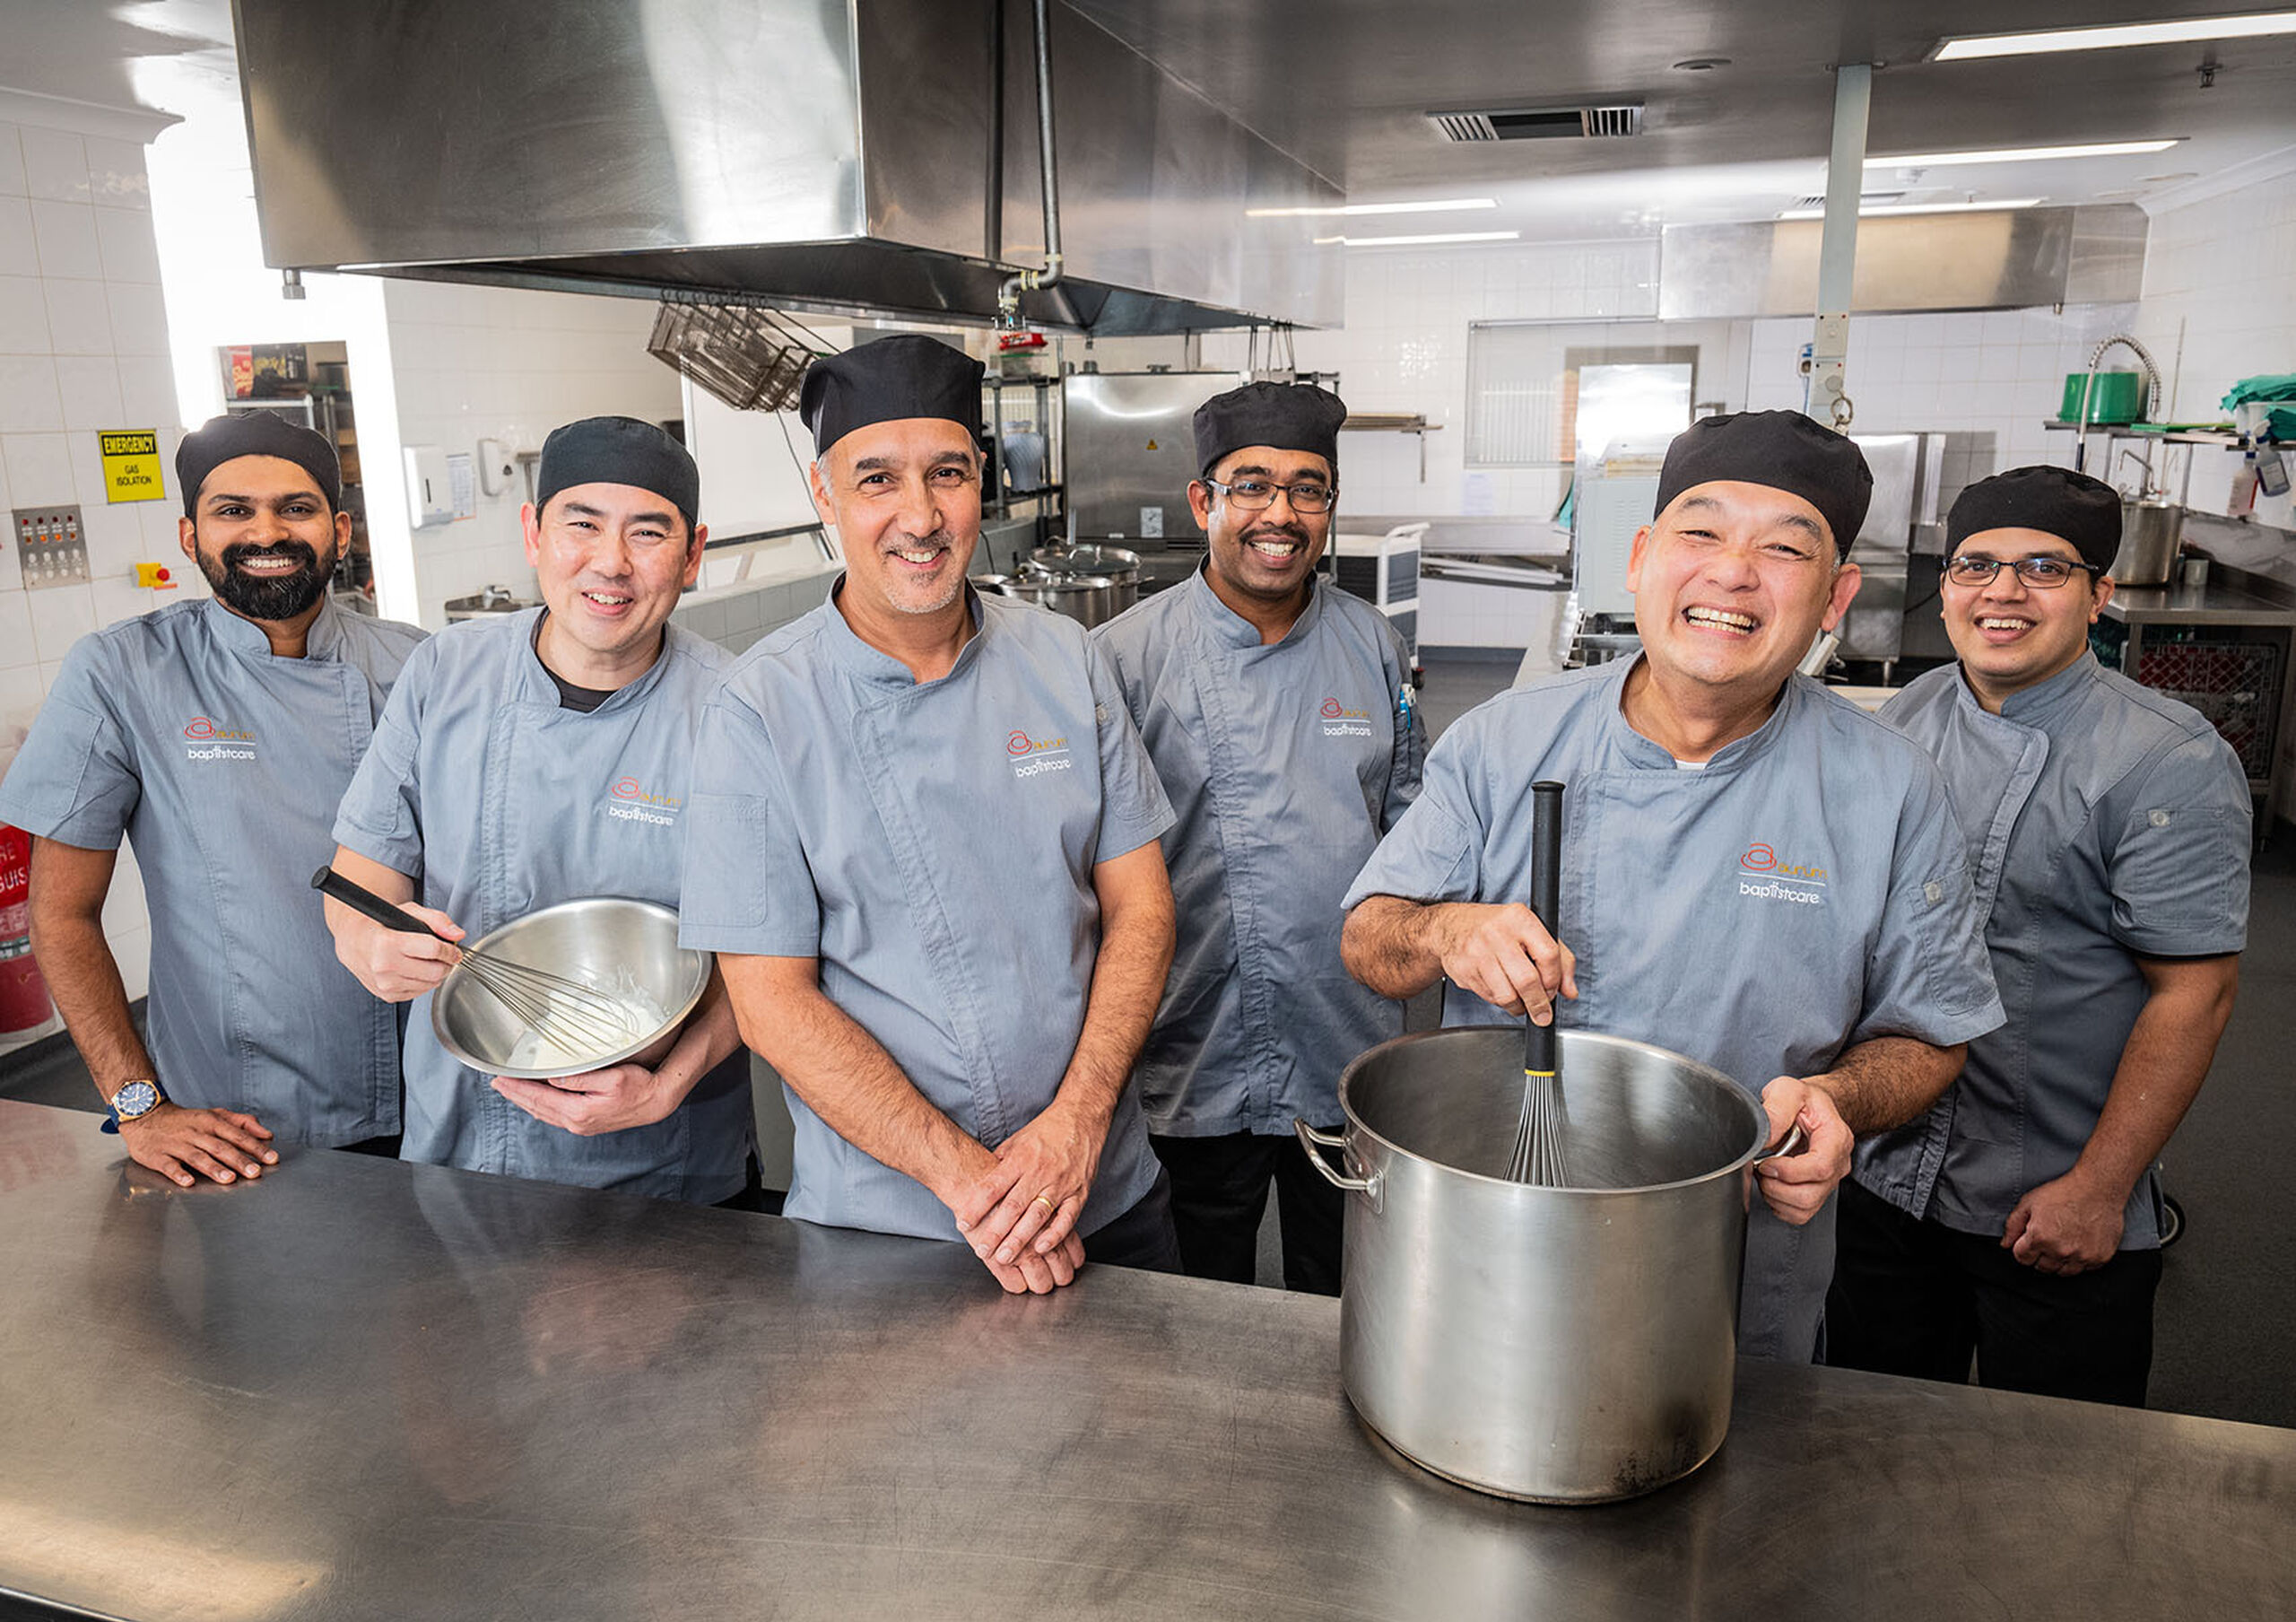 Five star chefs help pioneer change at Baptistcare residential aged care facilities